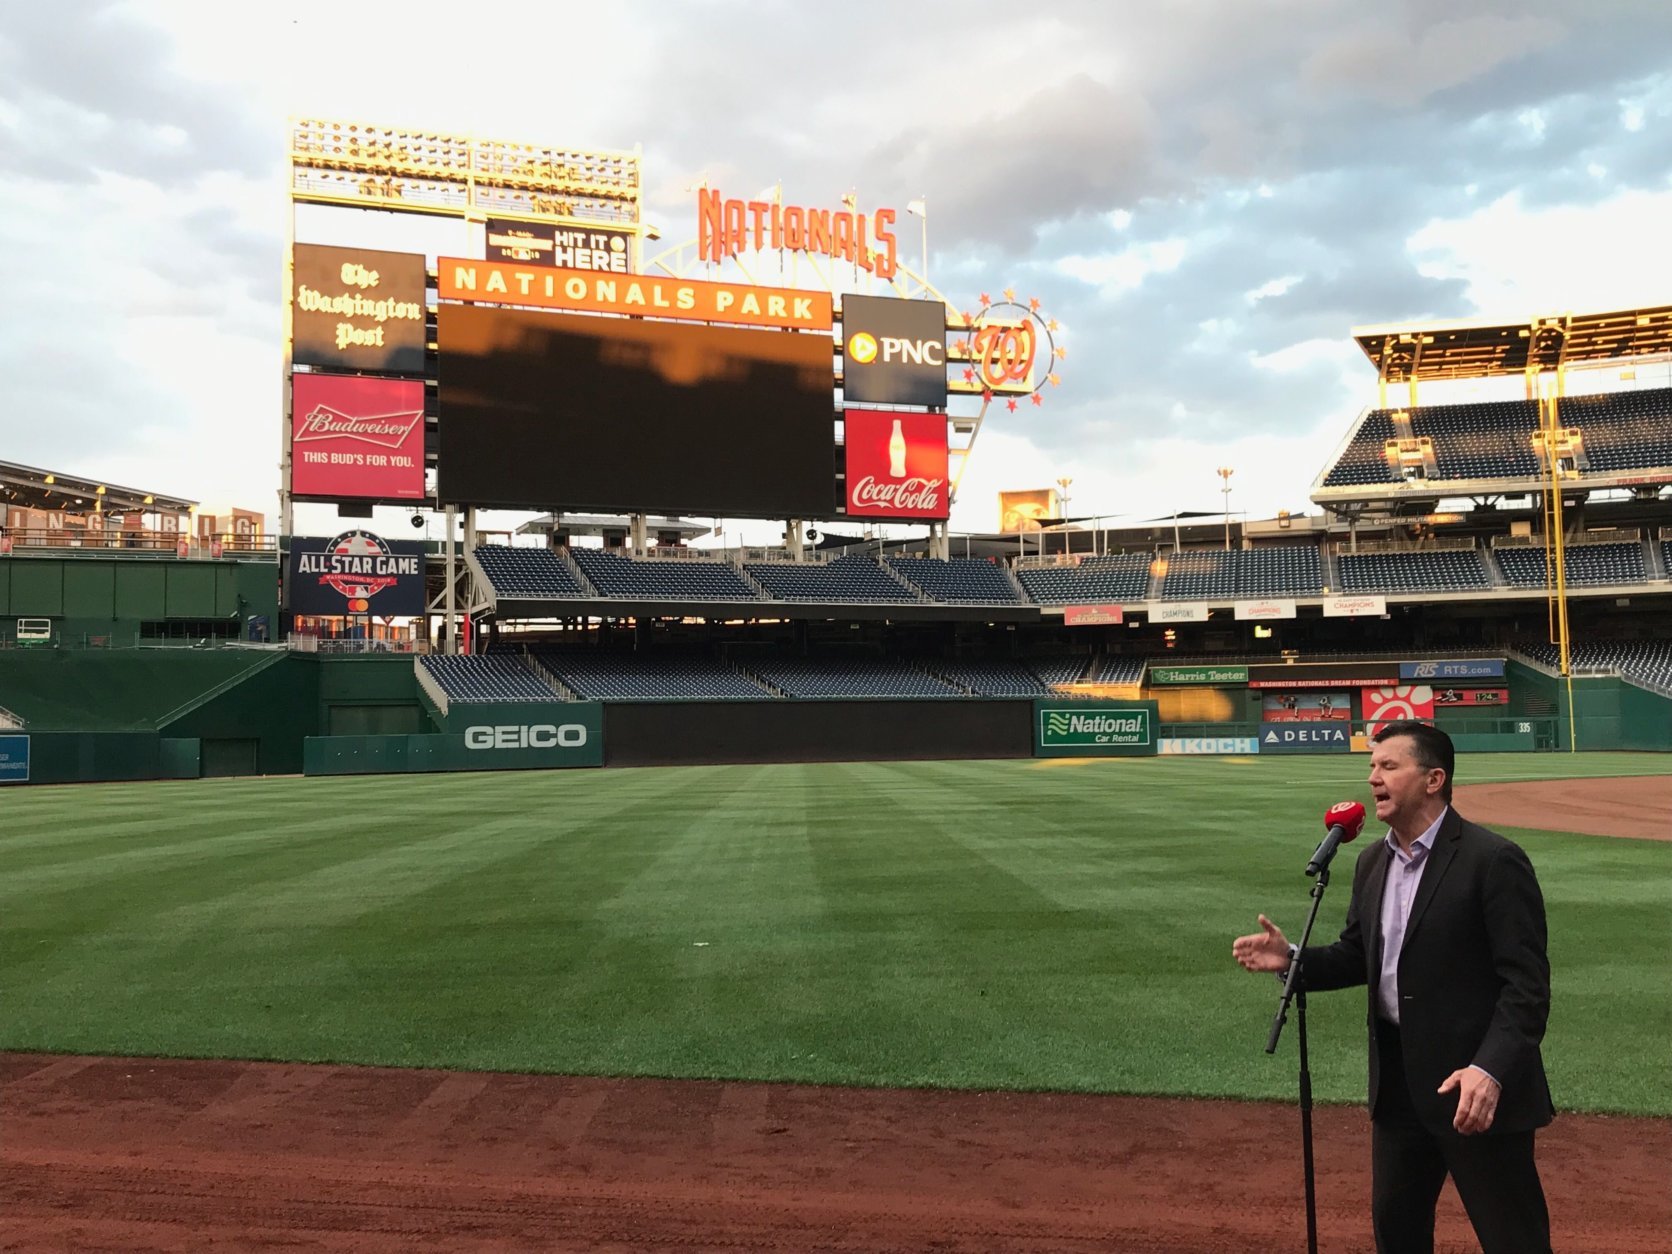 Another anthem singer performs during open auditions at Nationals Park. (WTOP/Michelle Basch)